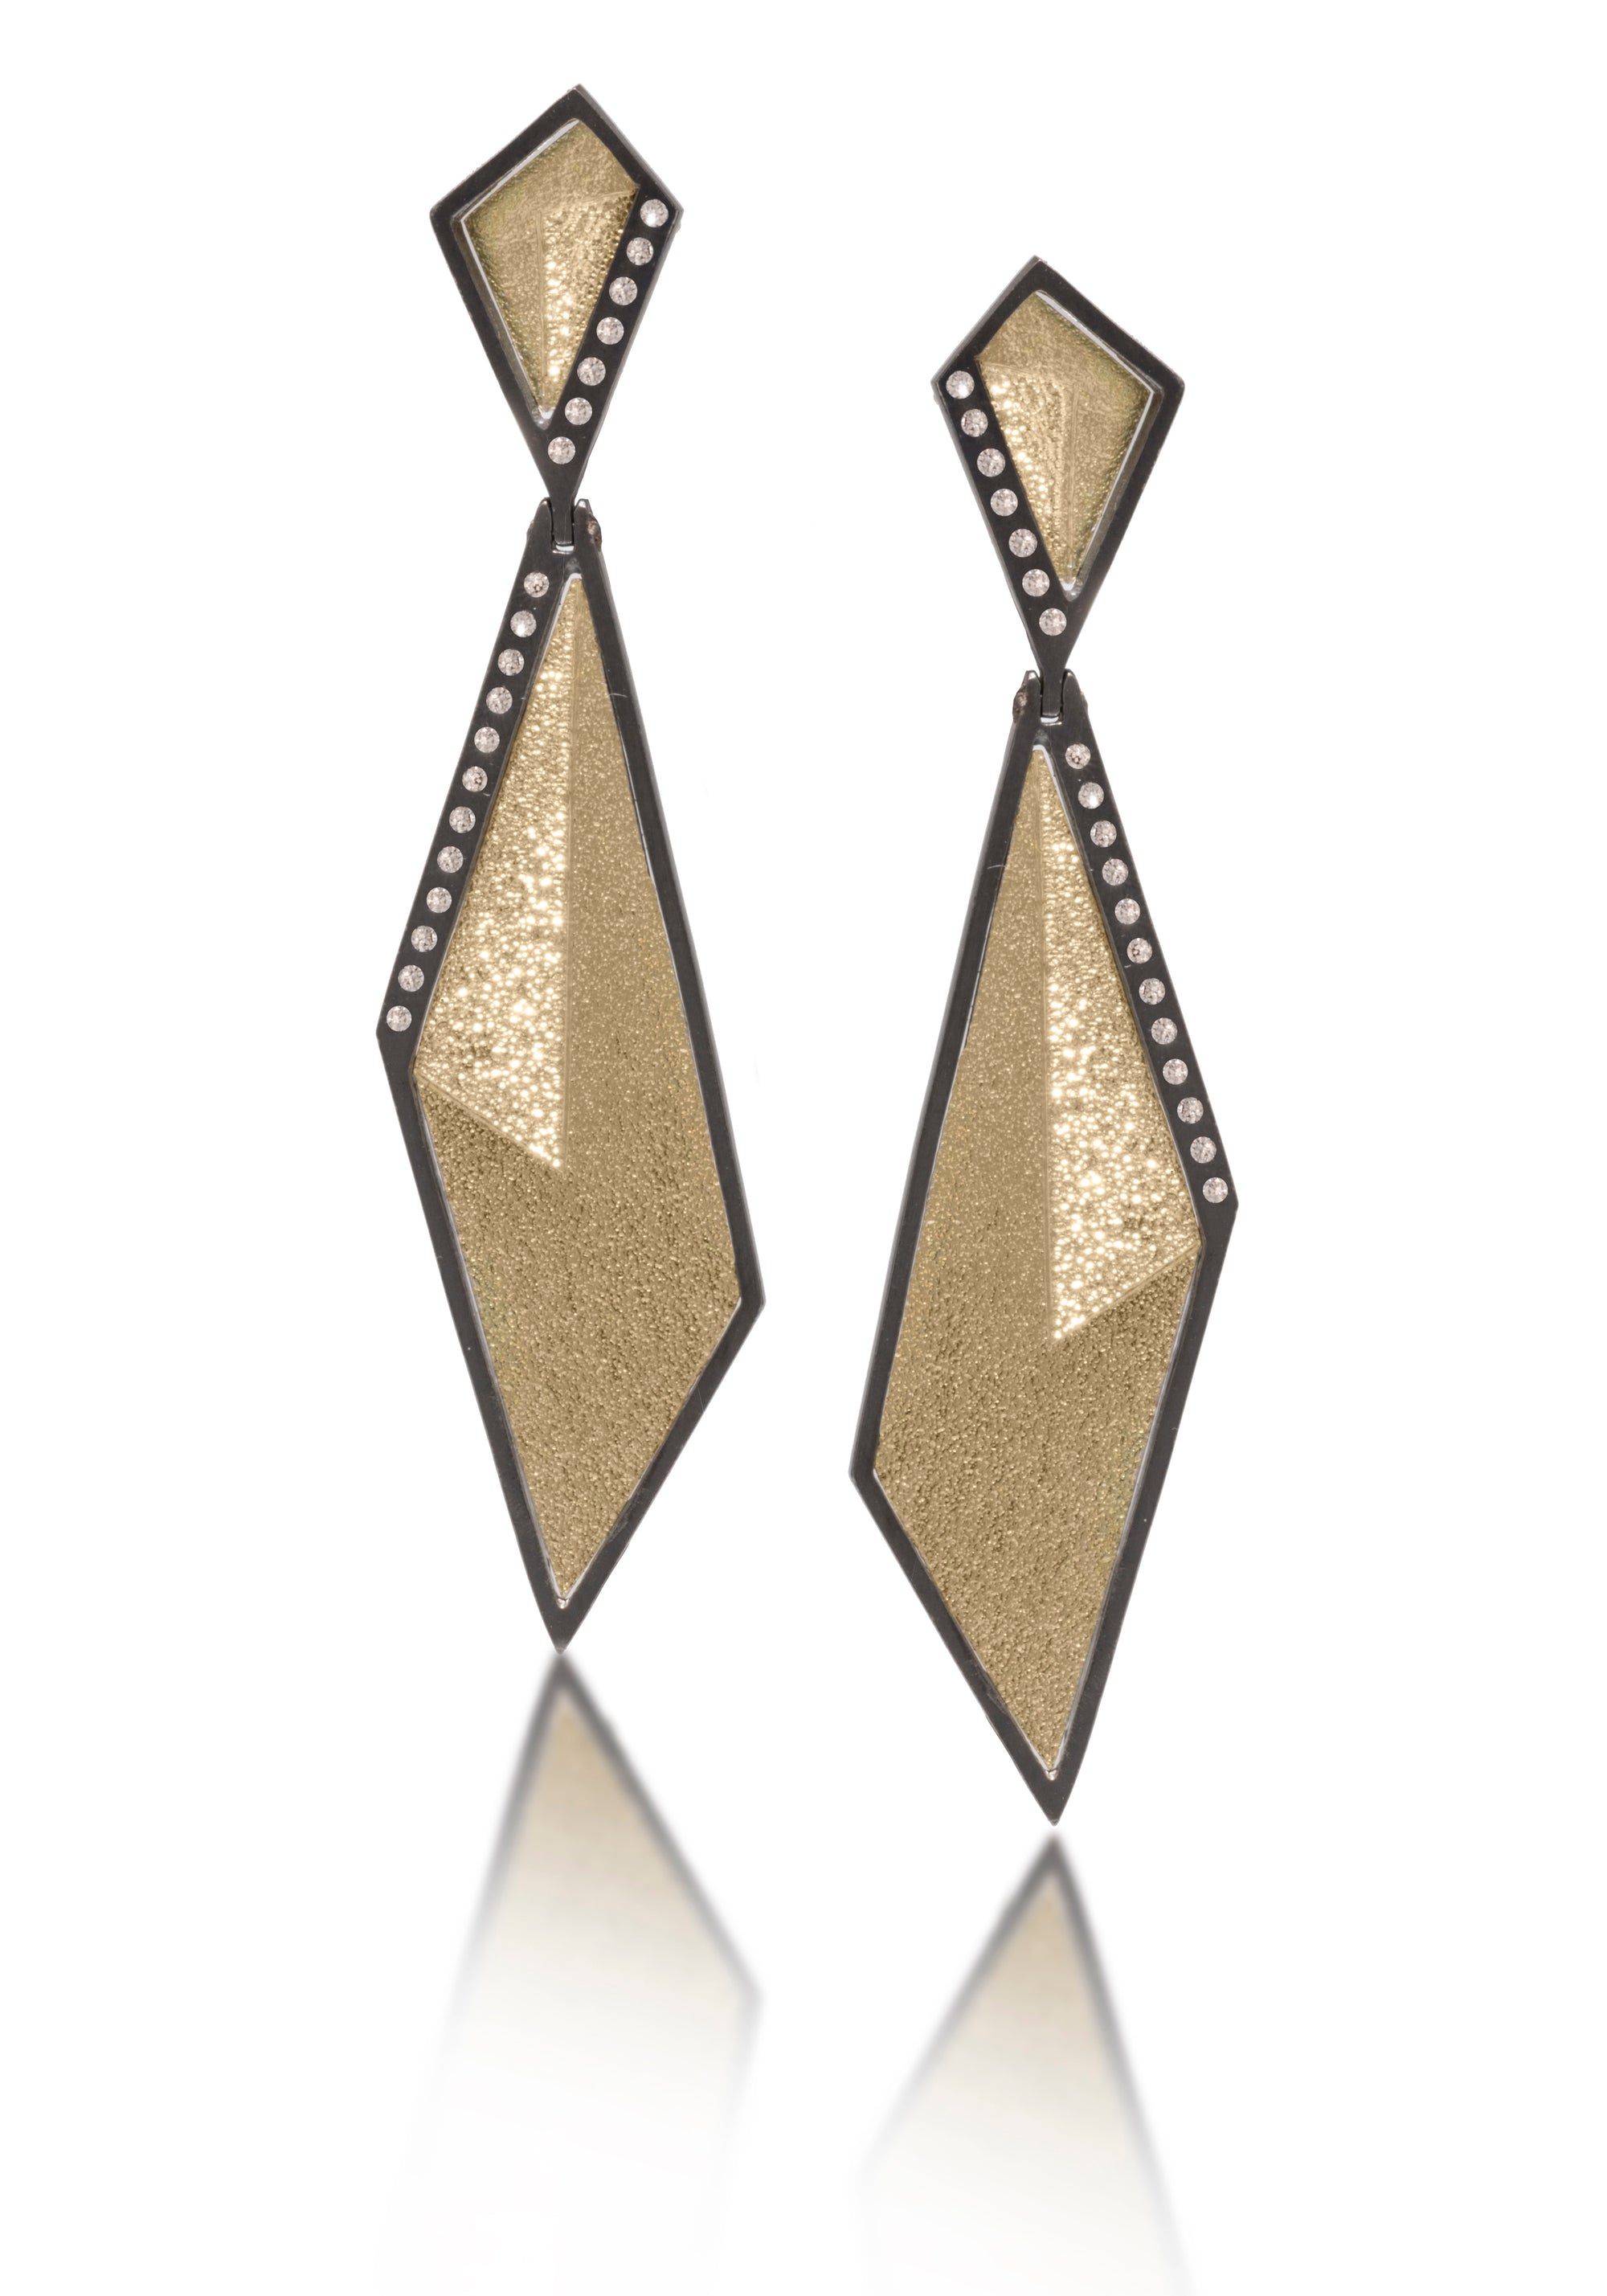 Gem Link Earring #15 in oxidized sterling silver and richly textured 18k bimetal, flush set with ideal cut white diamonds. Hinged, kite shaped or bar style top with 14k gold posts. Accent facet glitters with the texture of diamond facets, individually scored and textured.  0.2622 tcw